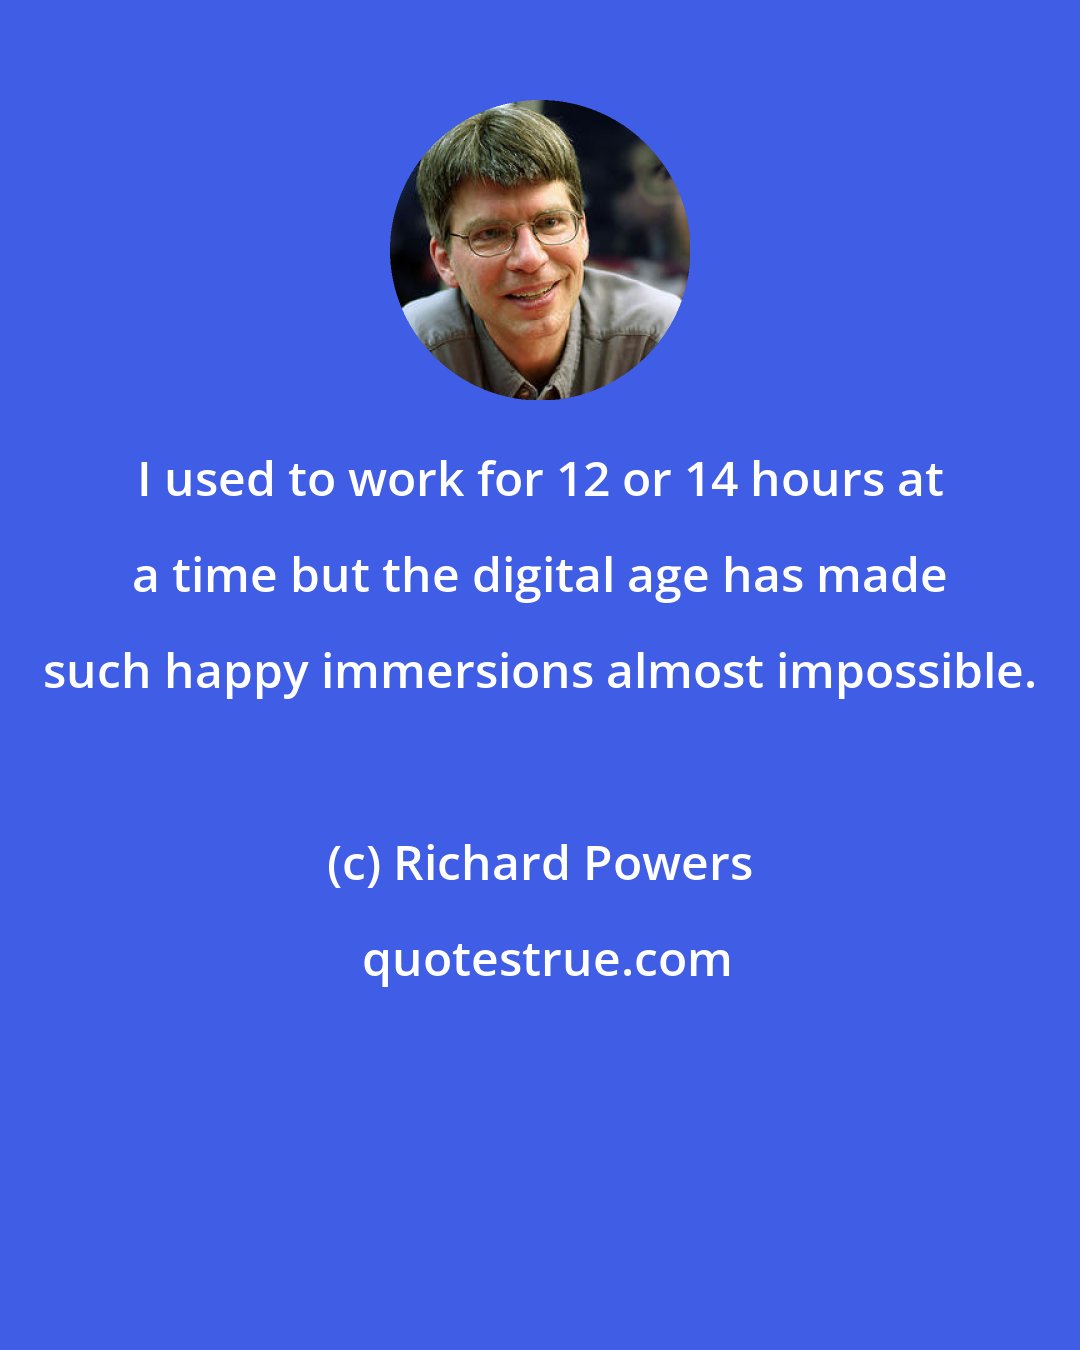 Richard Powers: I used to work for 12 or 14 hours at a time but the digital age has made such happy immersions almost impossible.